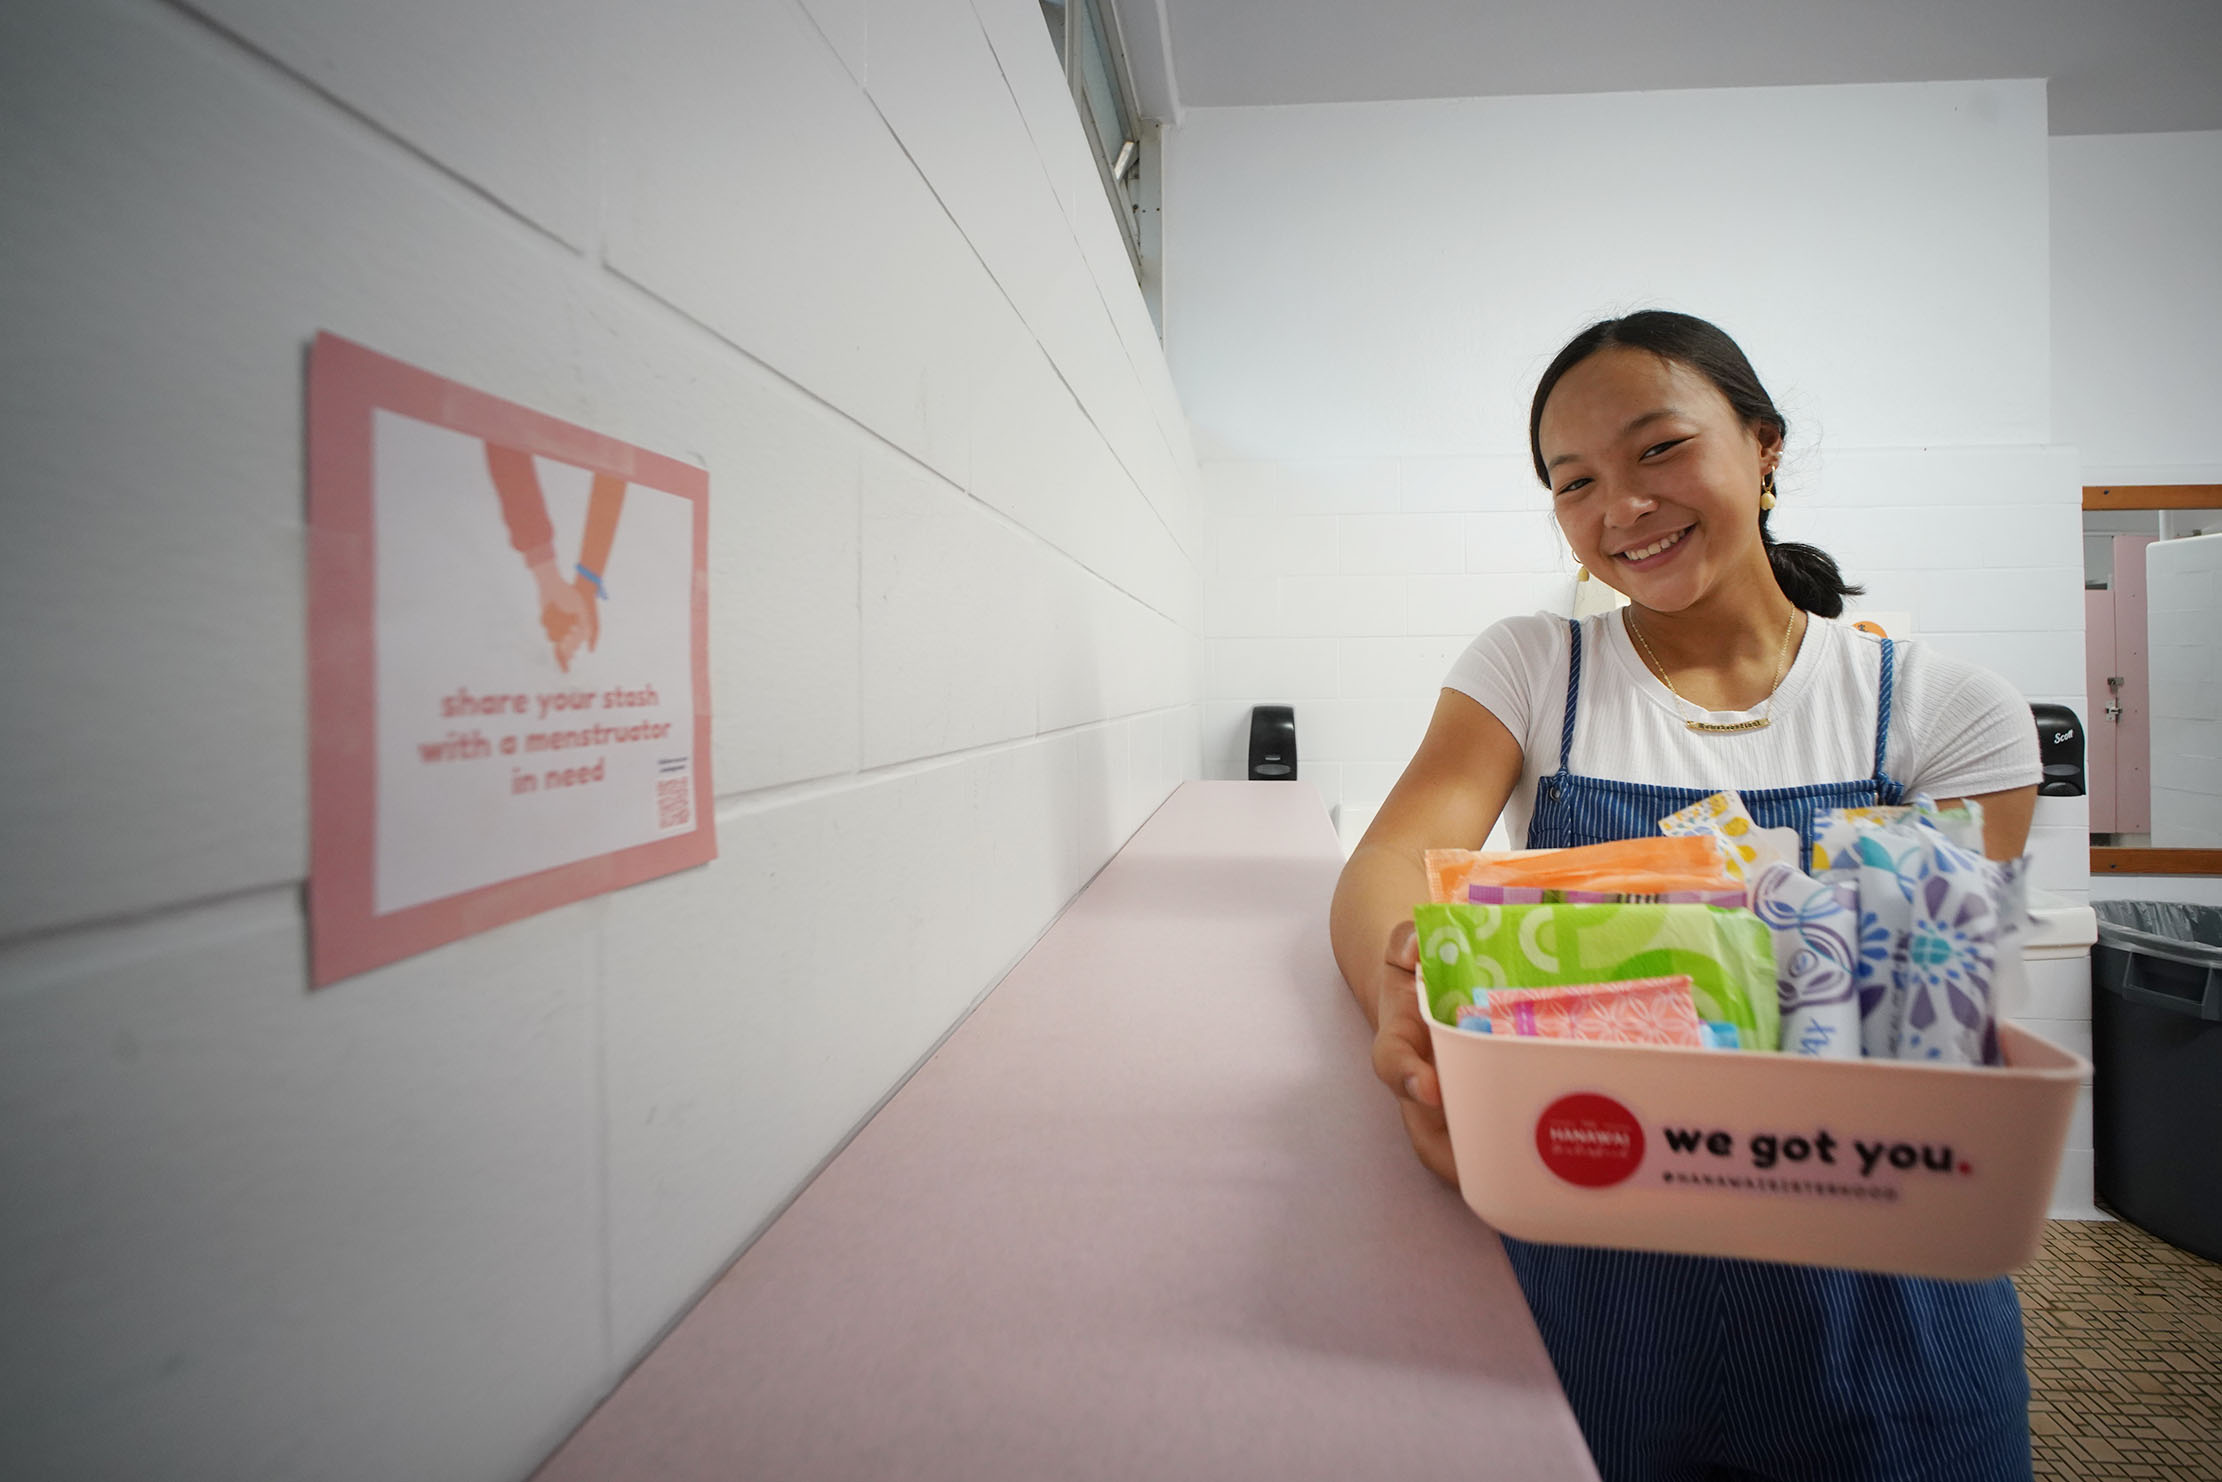 Free Menstruation Products May Soon Be Available In Hawaii’s Public Schools